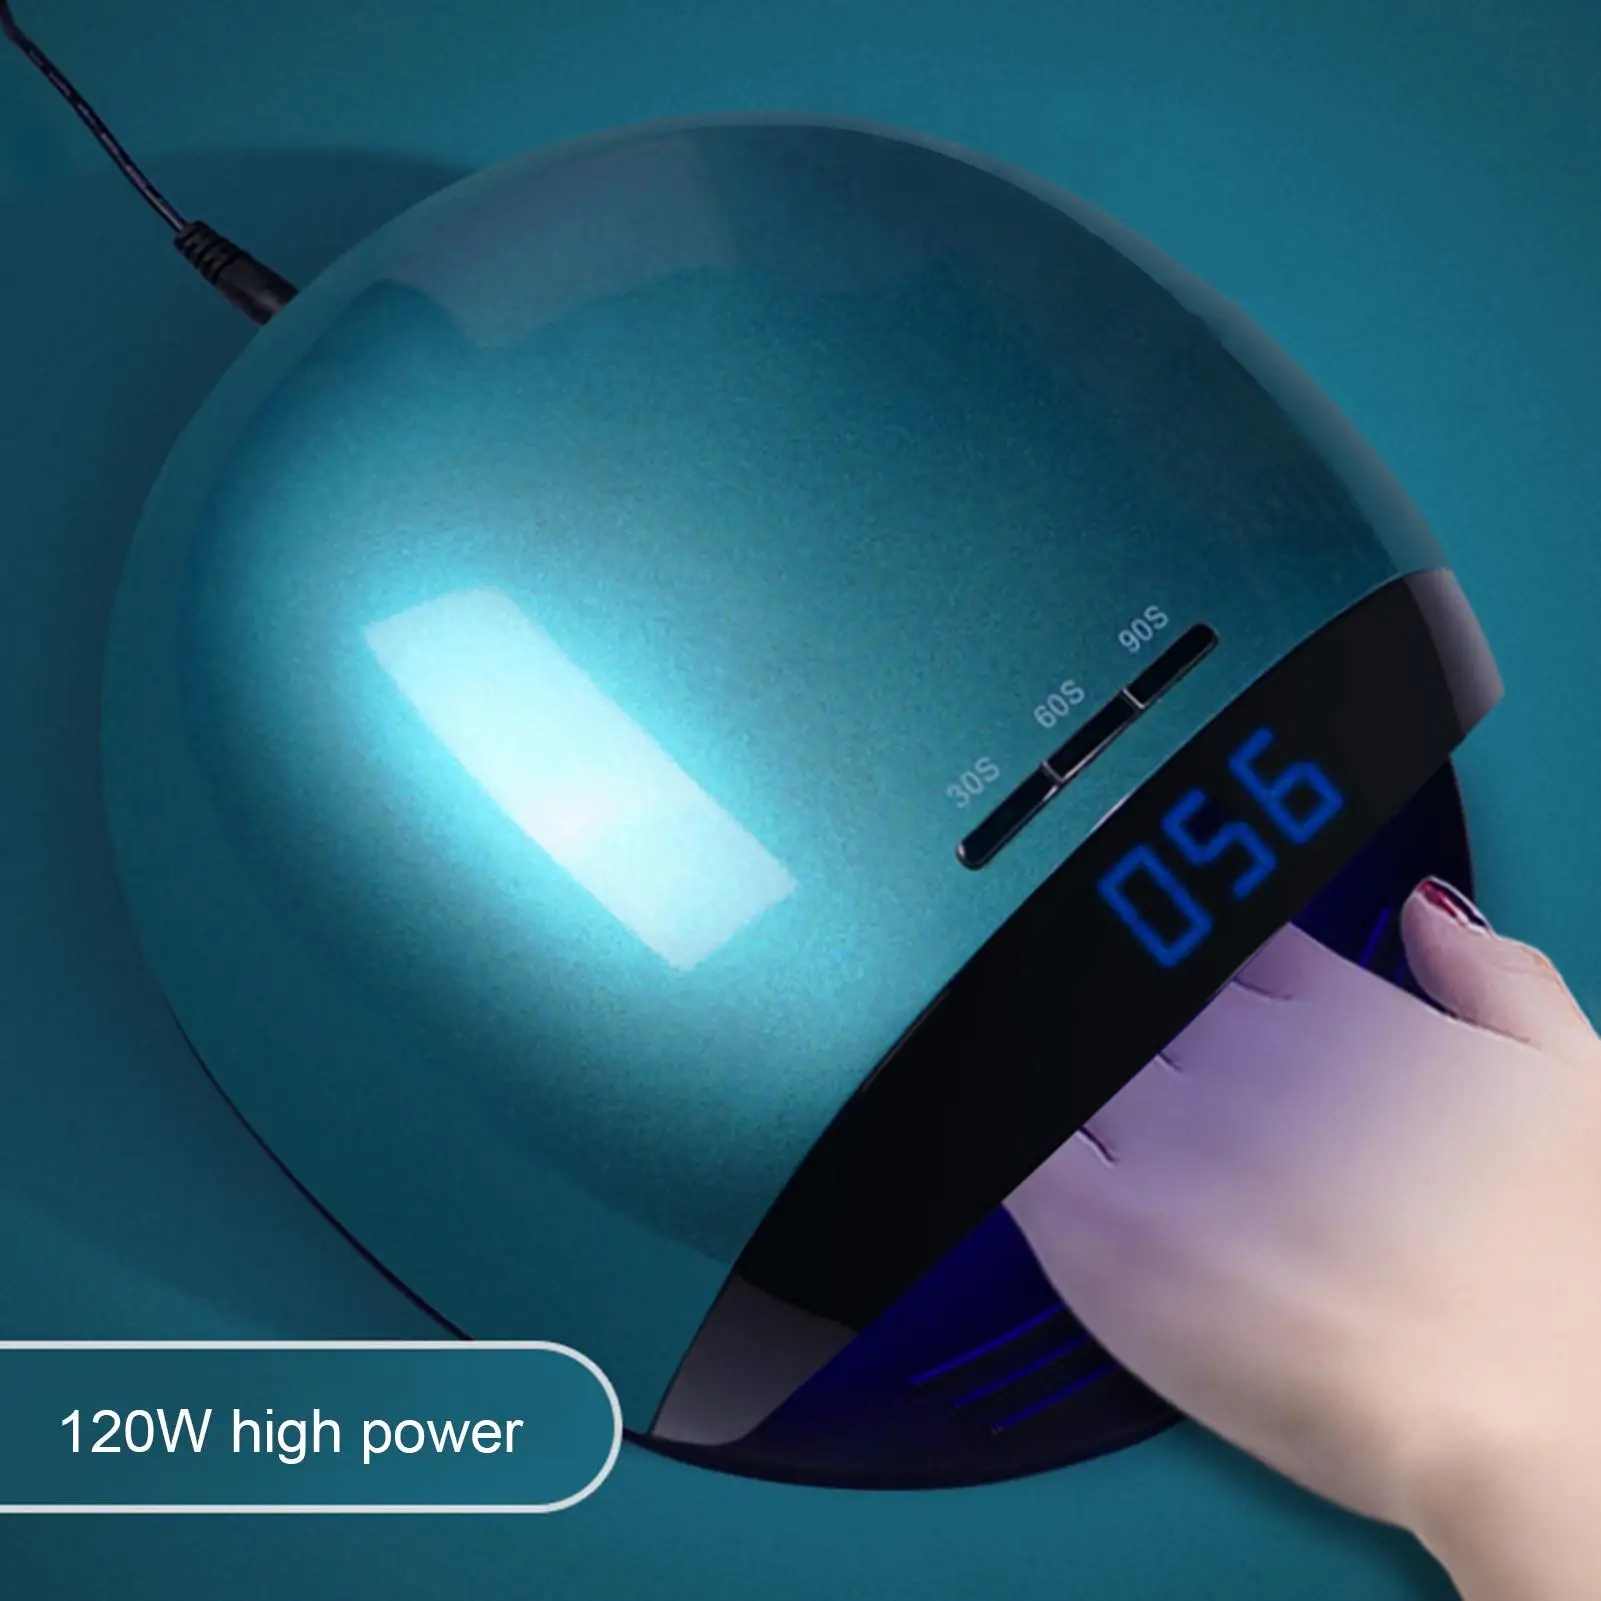 

120W Nail Dryers Baking Light Therapy Nail LED Lamp Portable Fast Dryer UV LED Nail Lamp Curing Light with LCD Display Screen